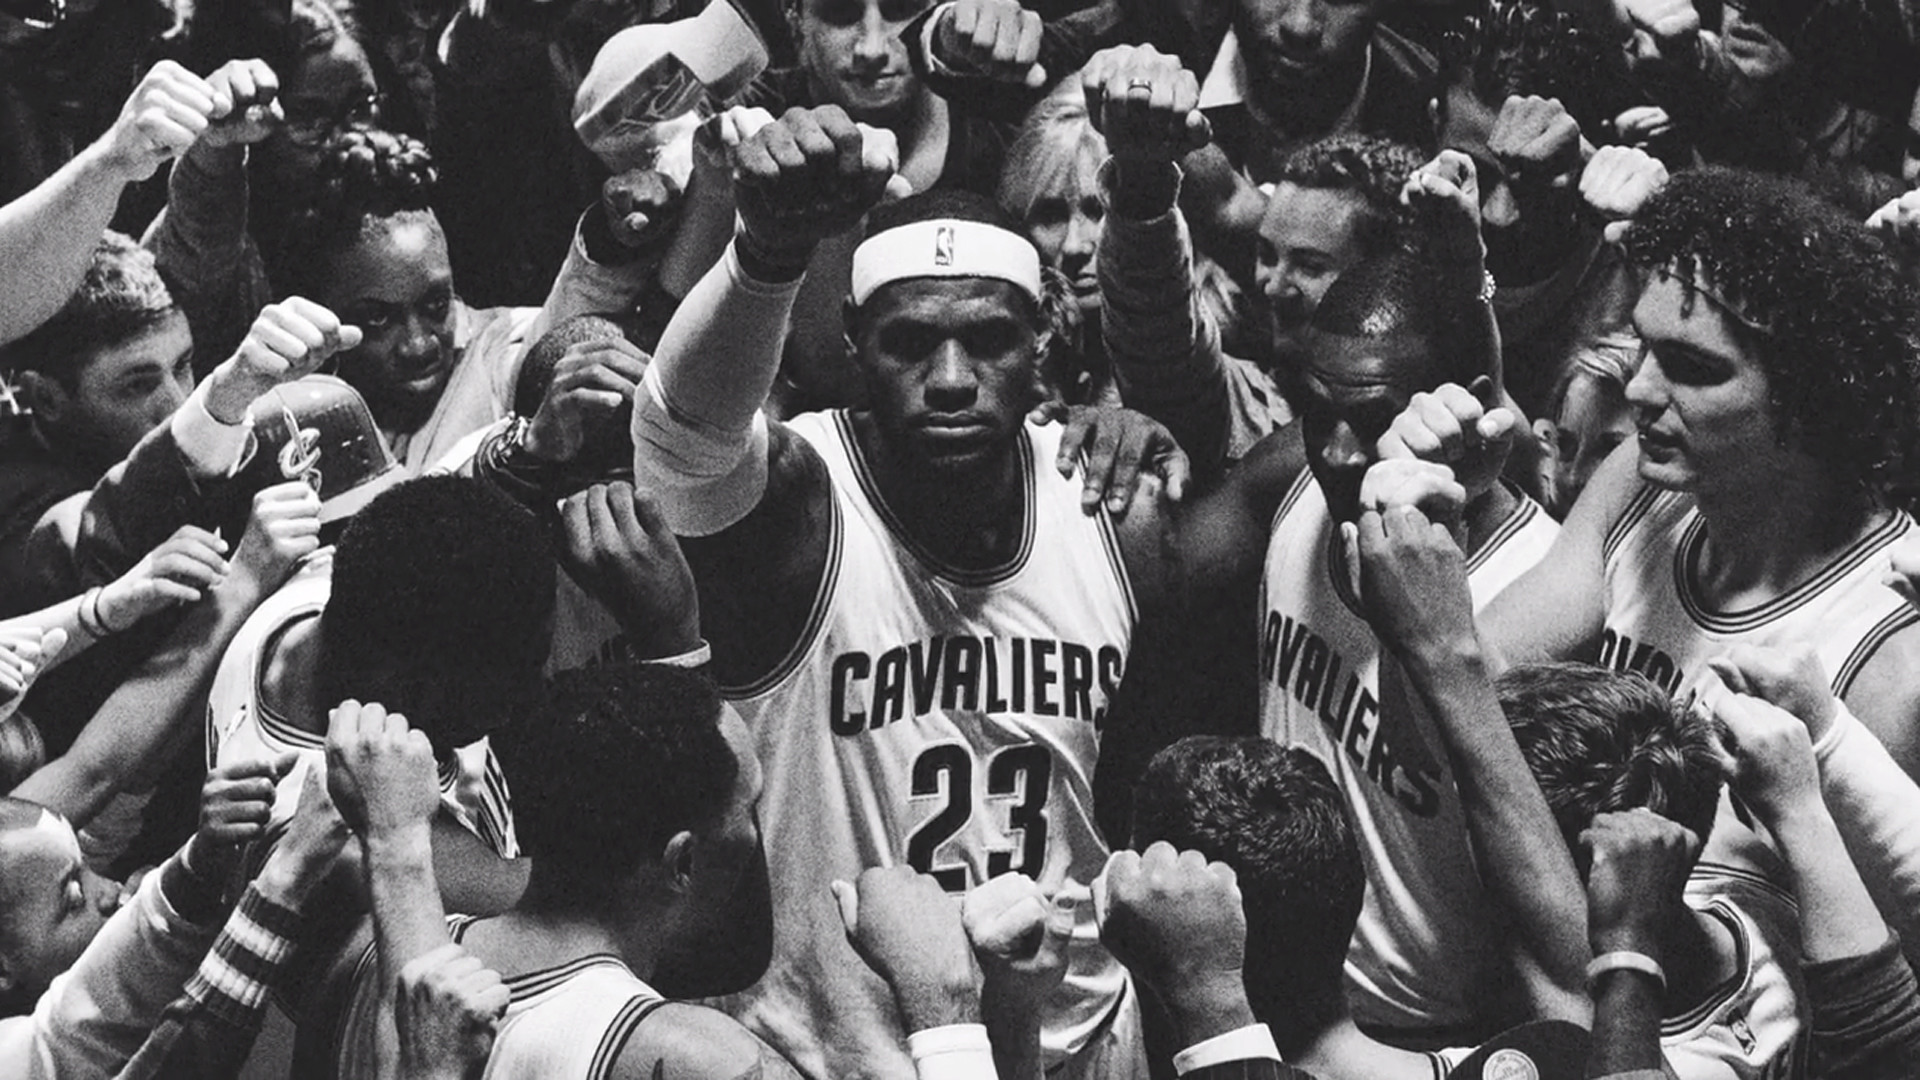 1920x1080 Nike's LeBron James return to Cleveland ad will give you chills | NBA |  Sporting News